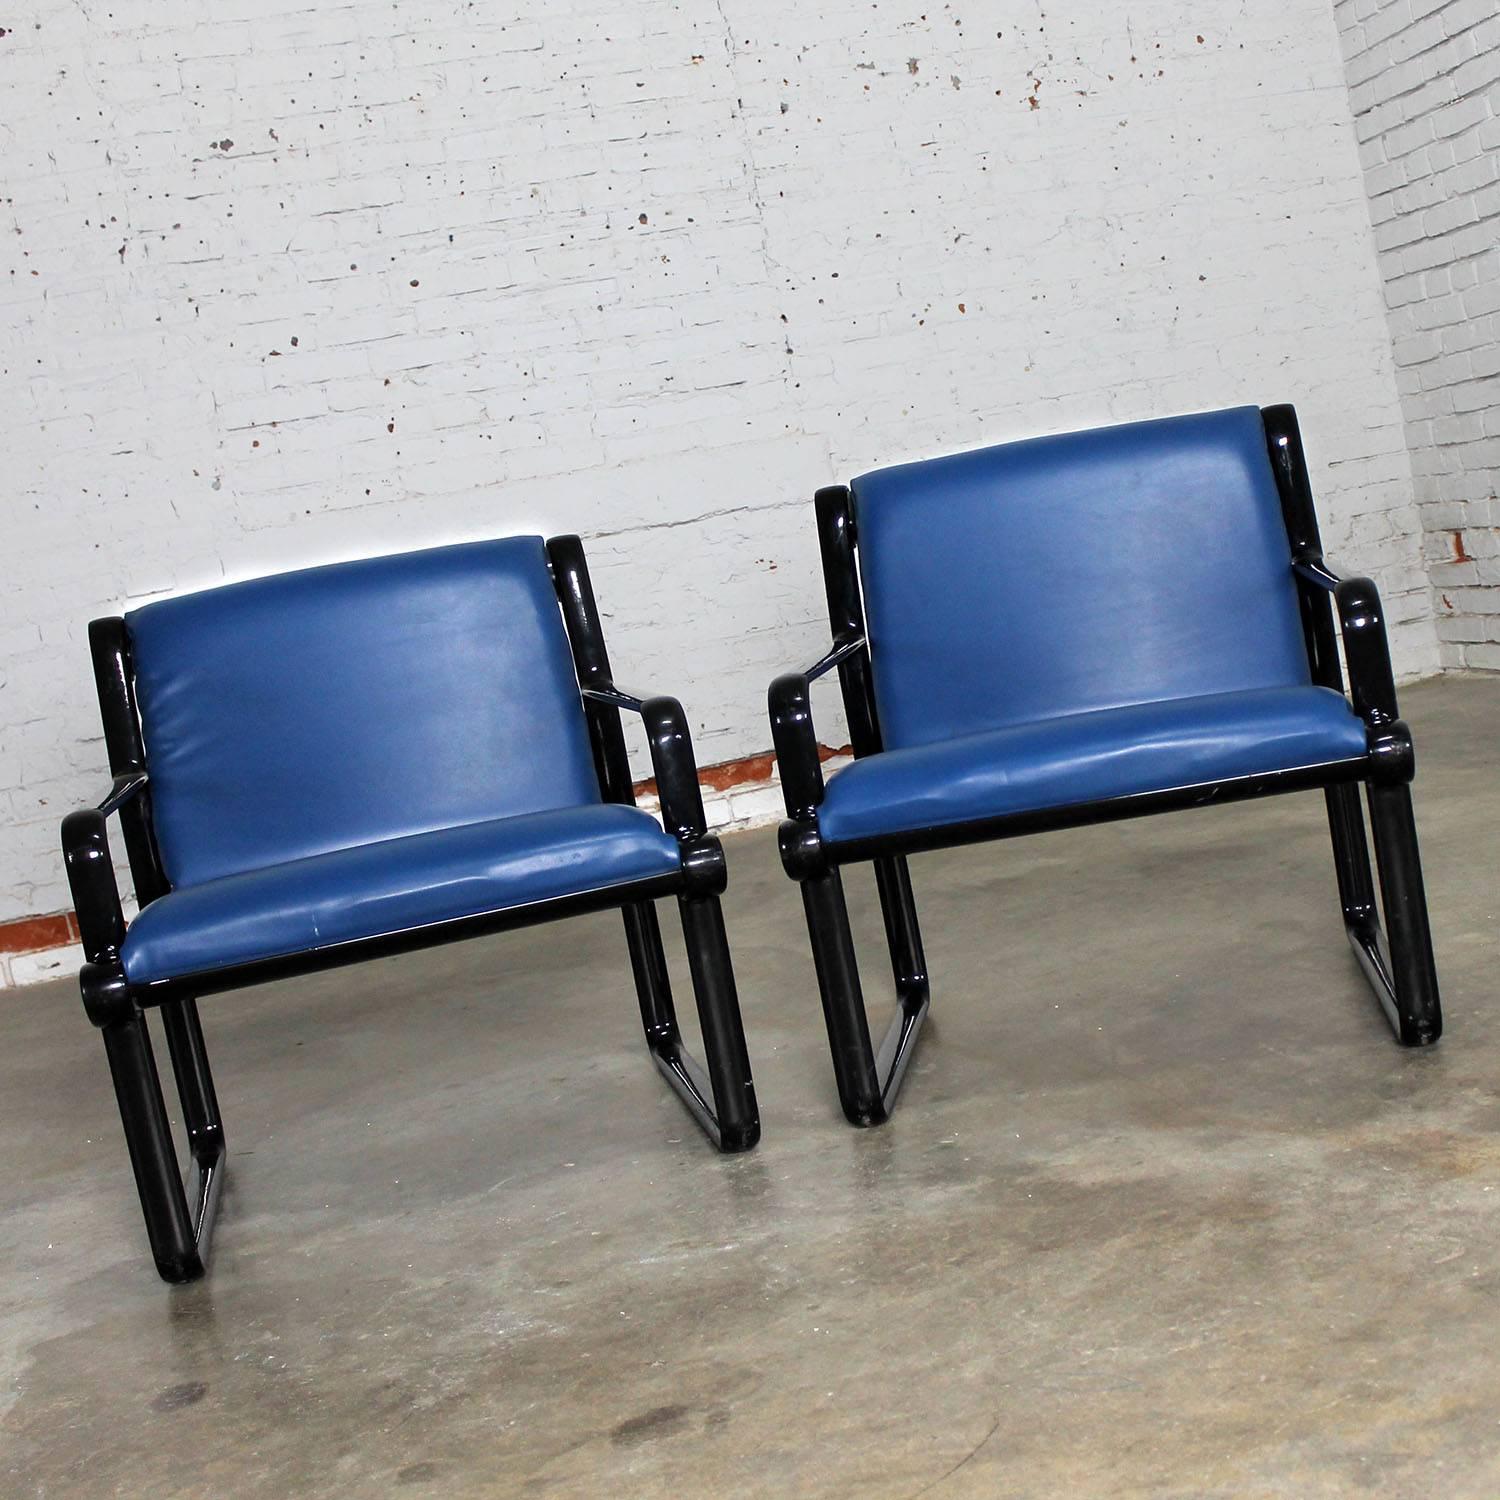 Late 20th Century Pair of Hannah Morrison for Knoll Sling Armchairs in Black and Blue For Sale